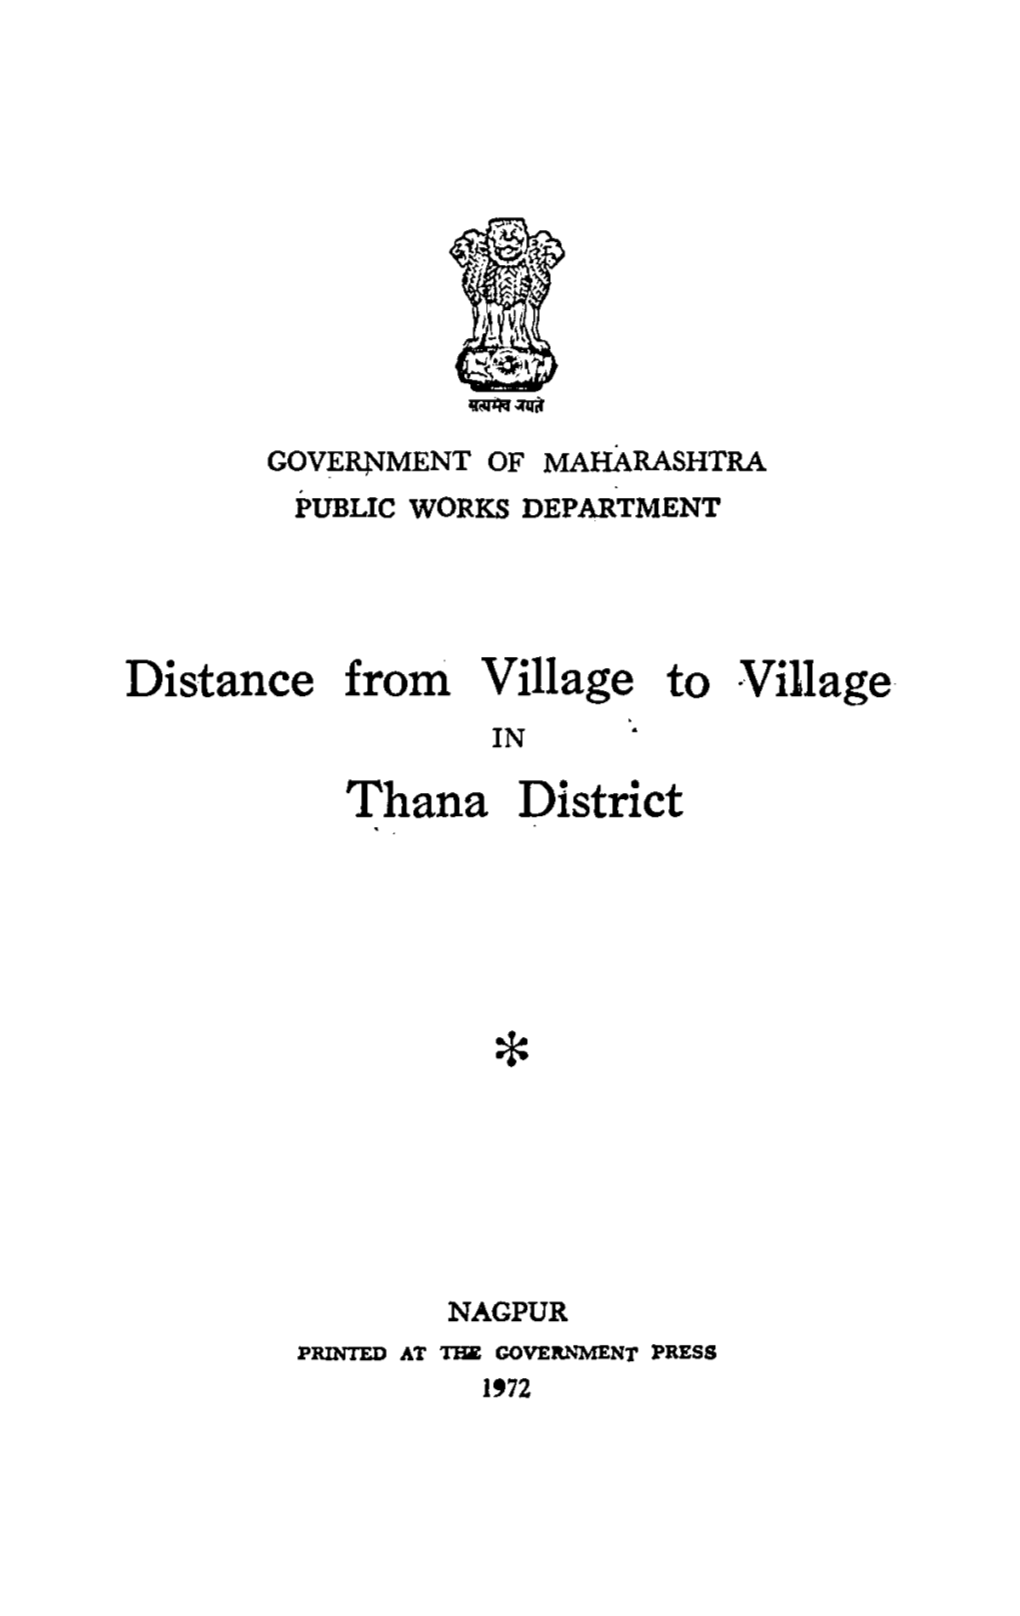 Distance from Village to Village Thana District